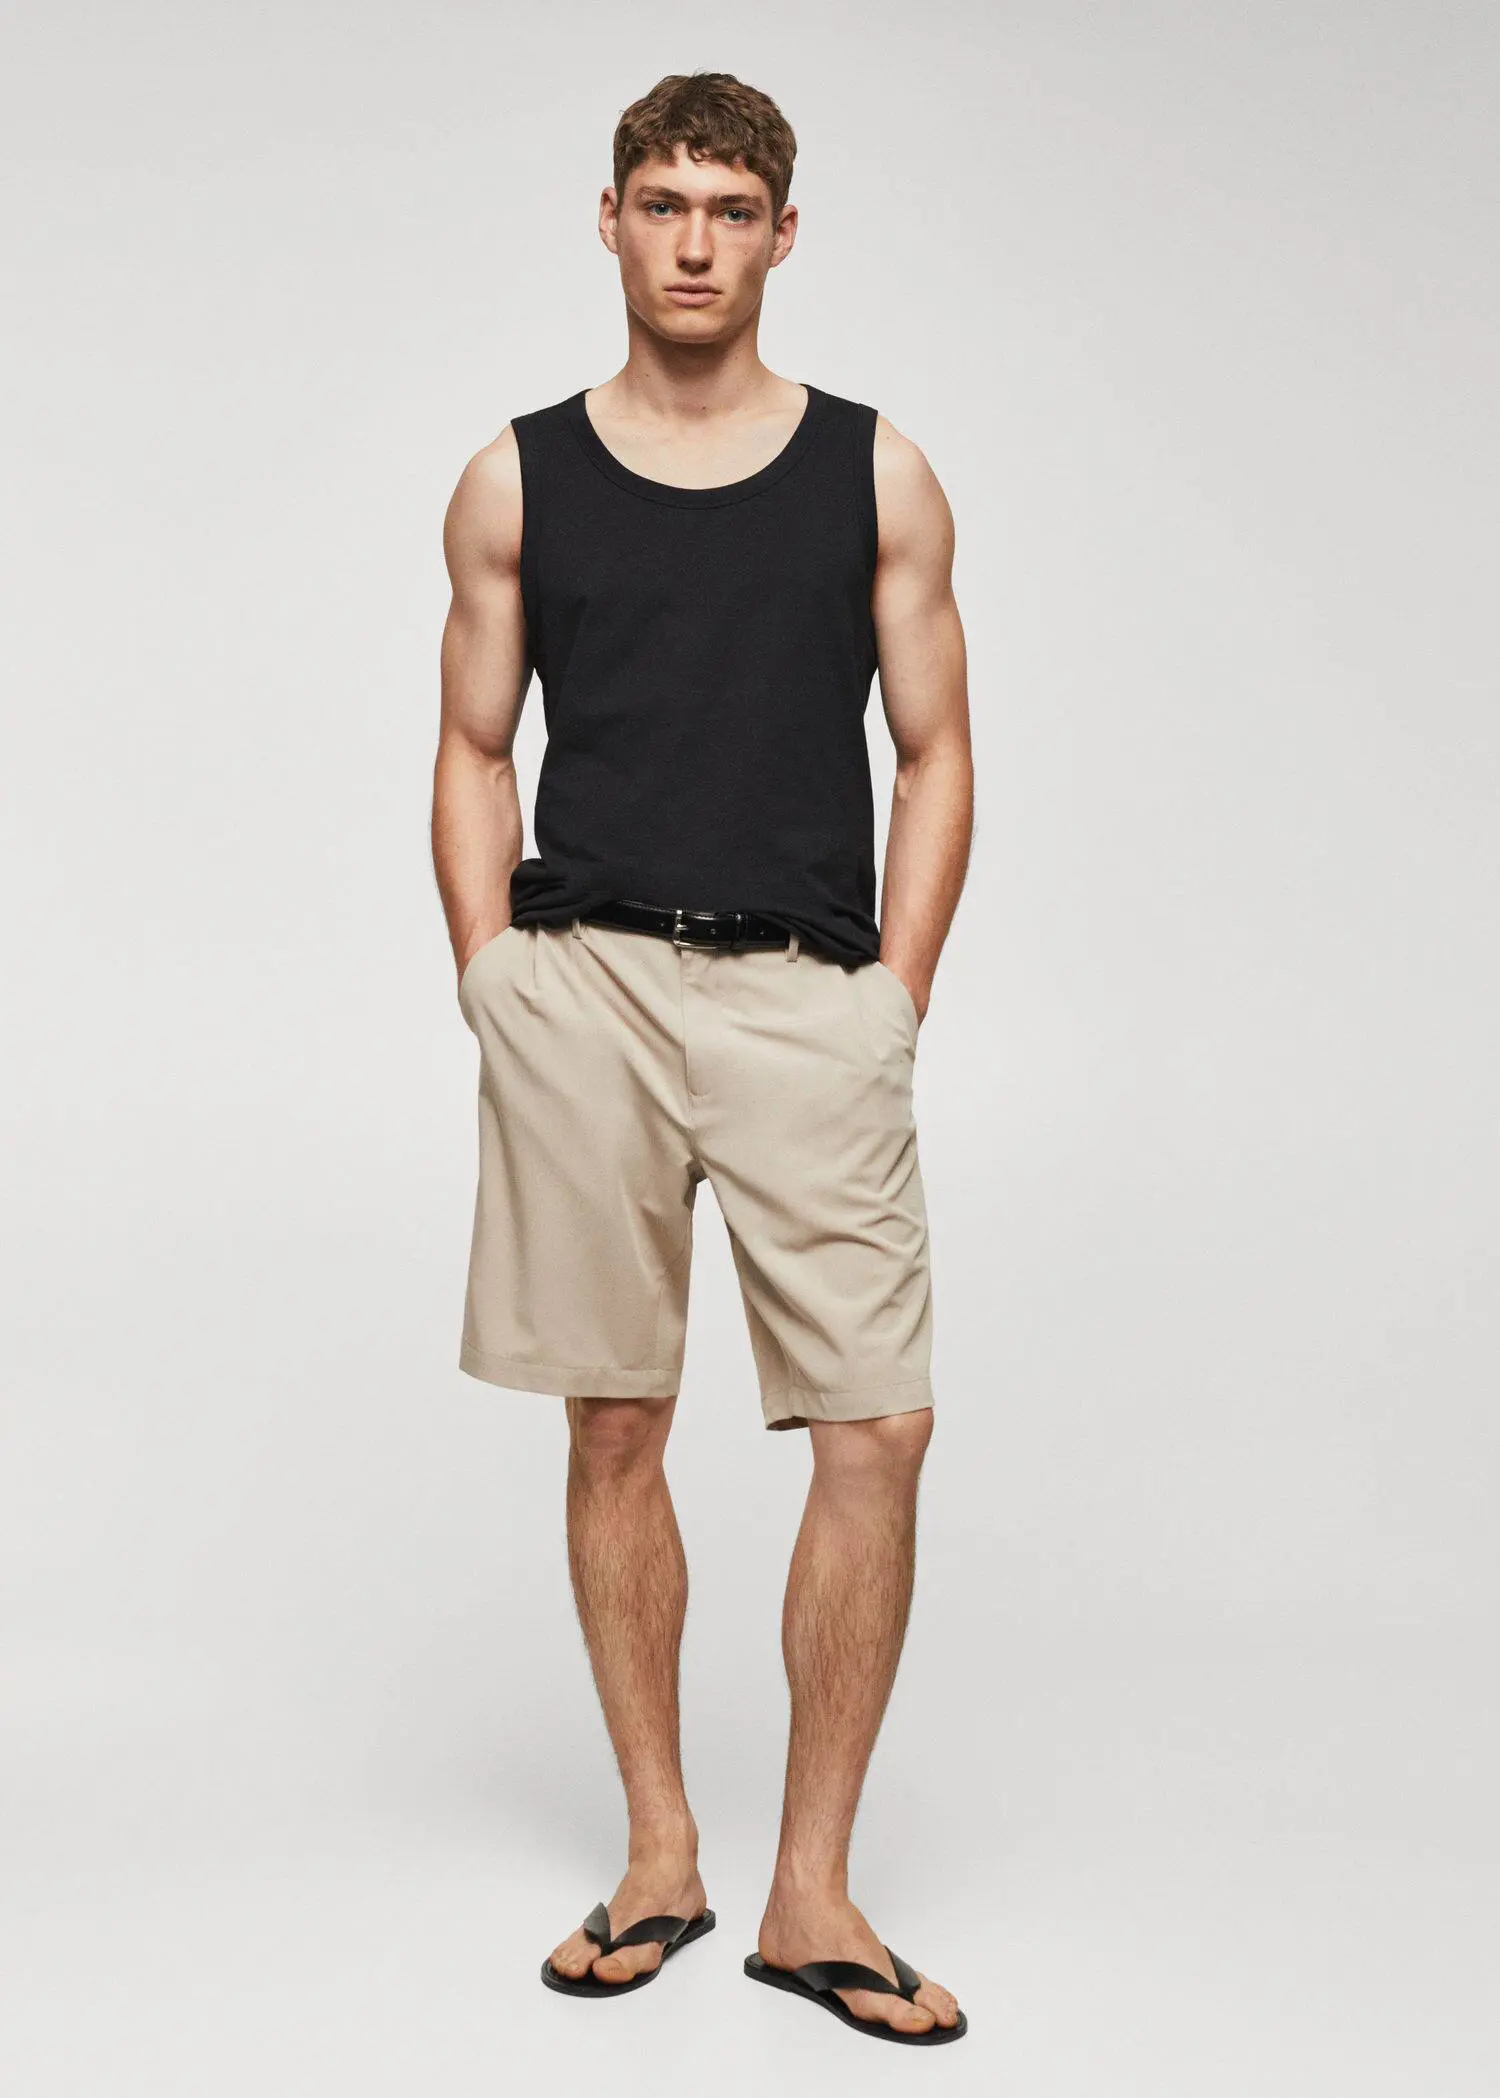 Mango Strap cotton T-shirt. a man in black tank top and beige shorts. 